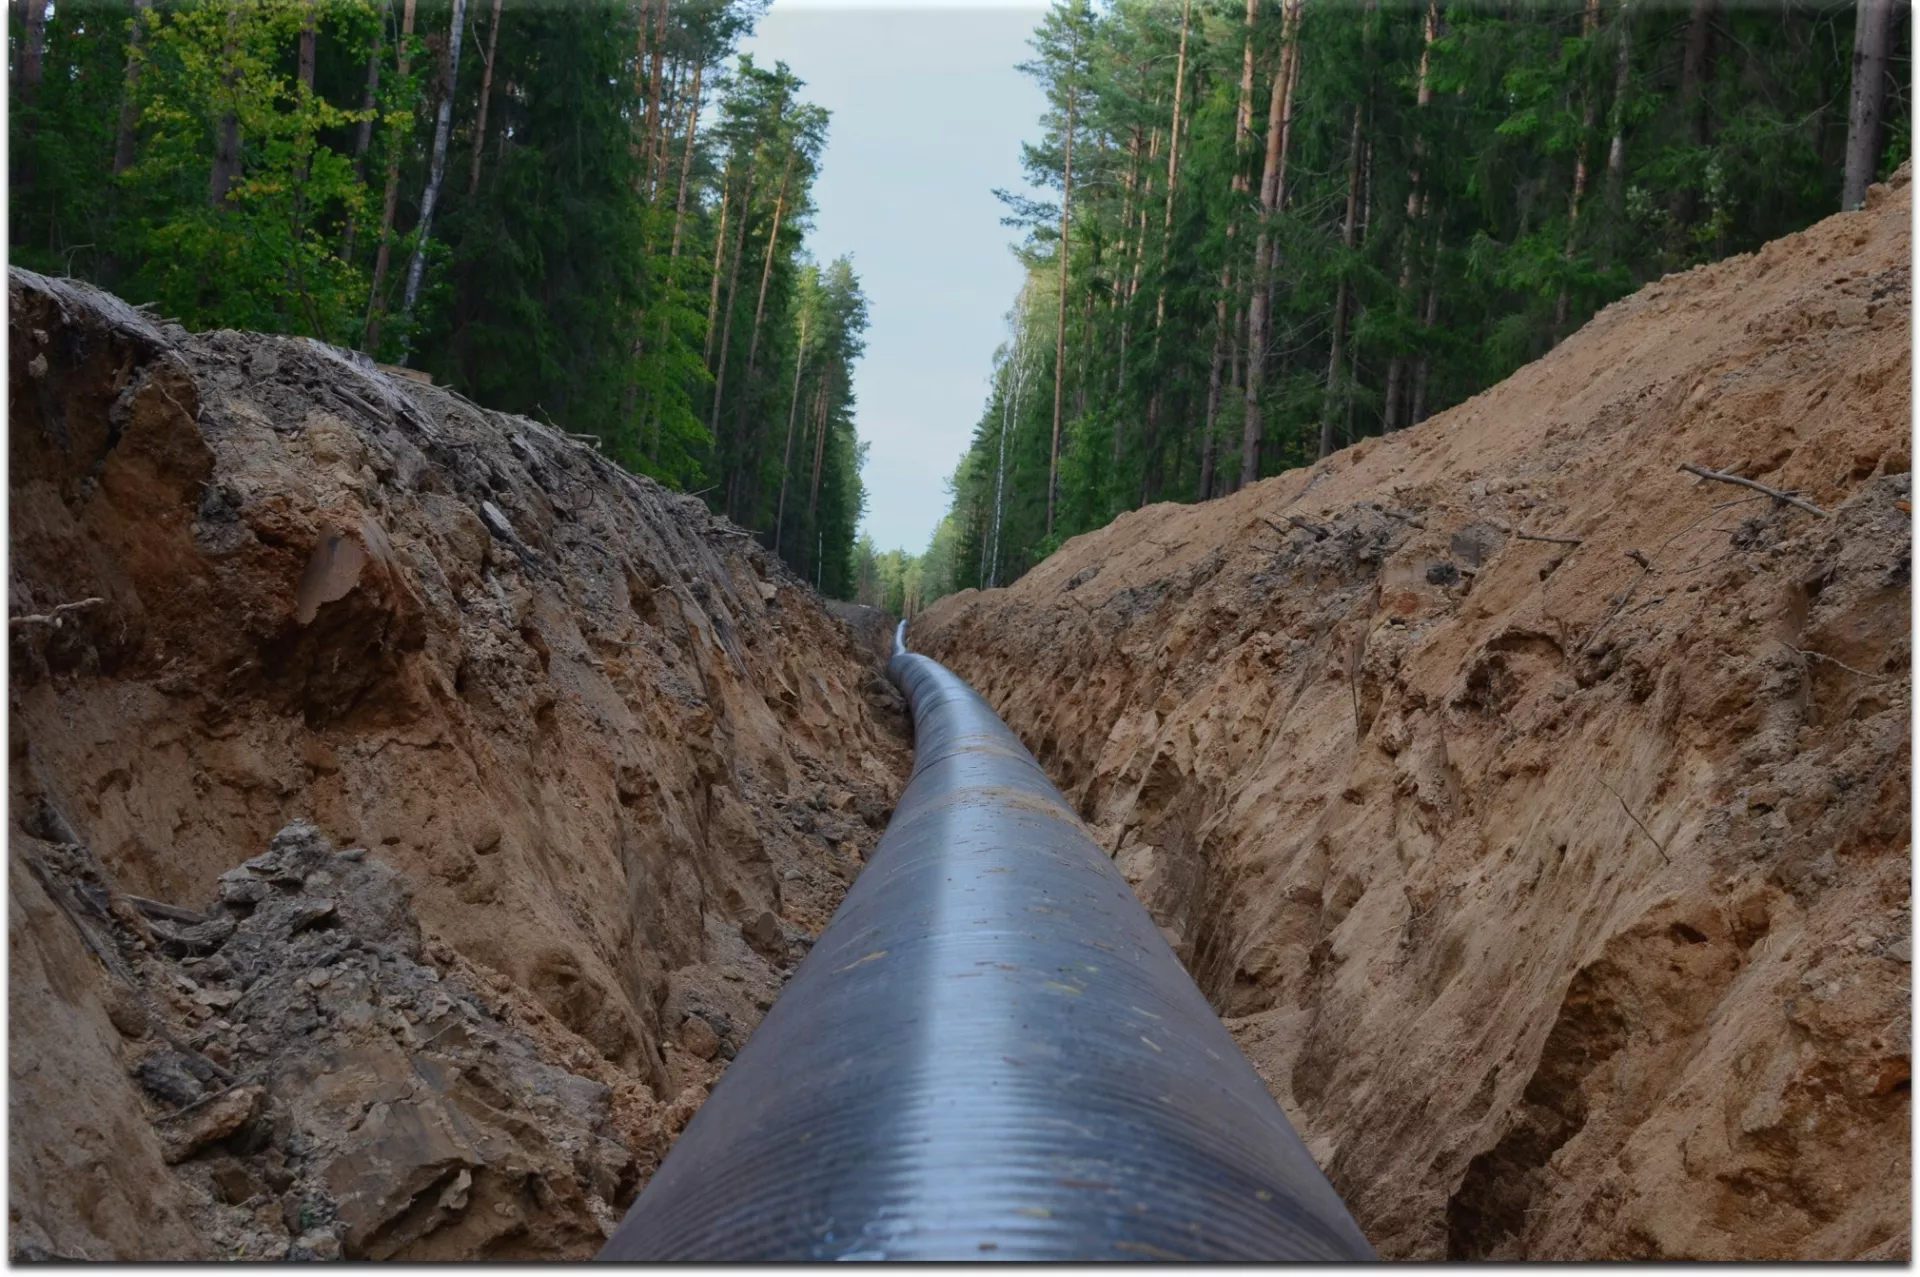 Pipeline in green environment